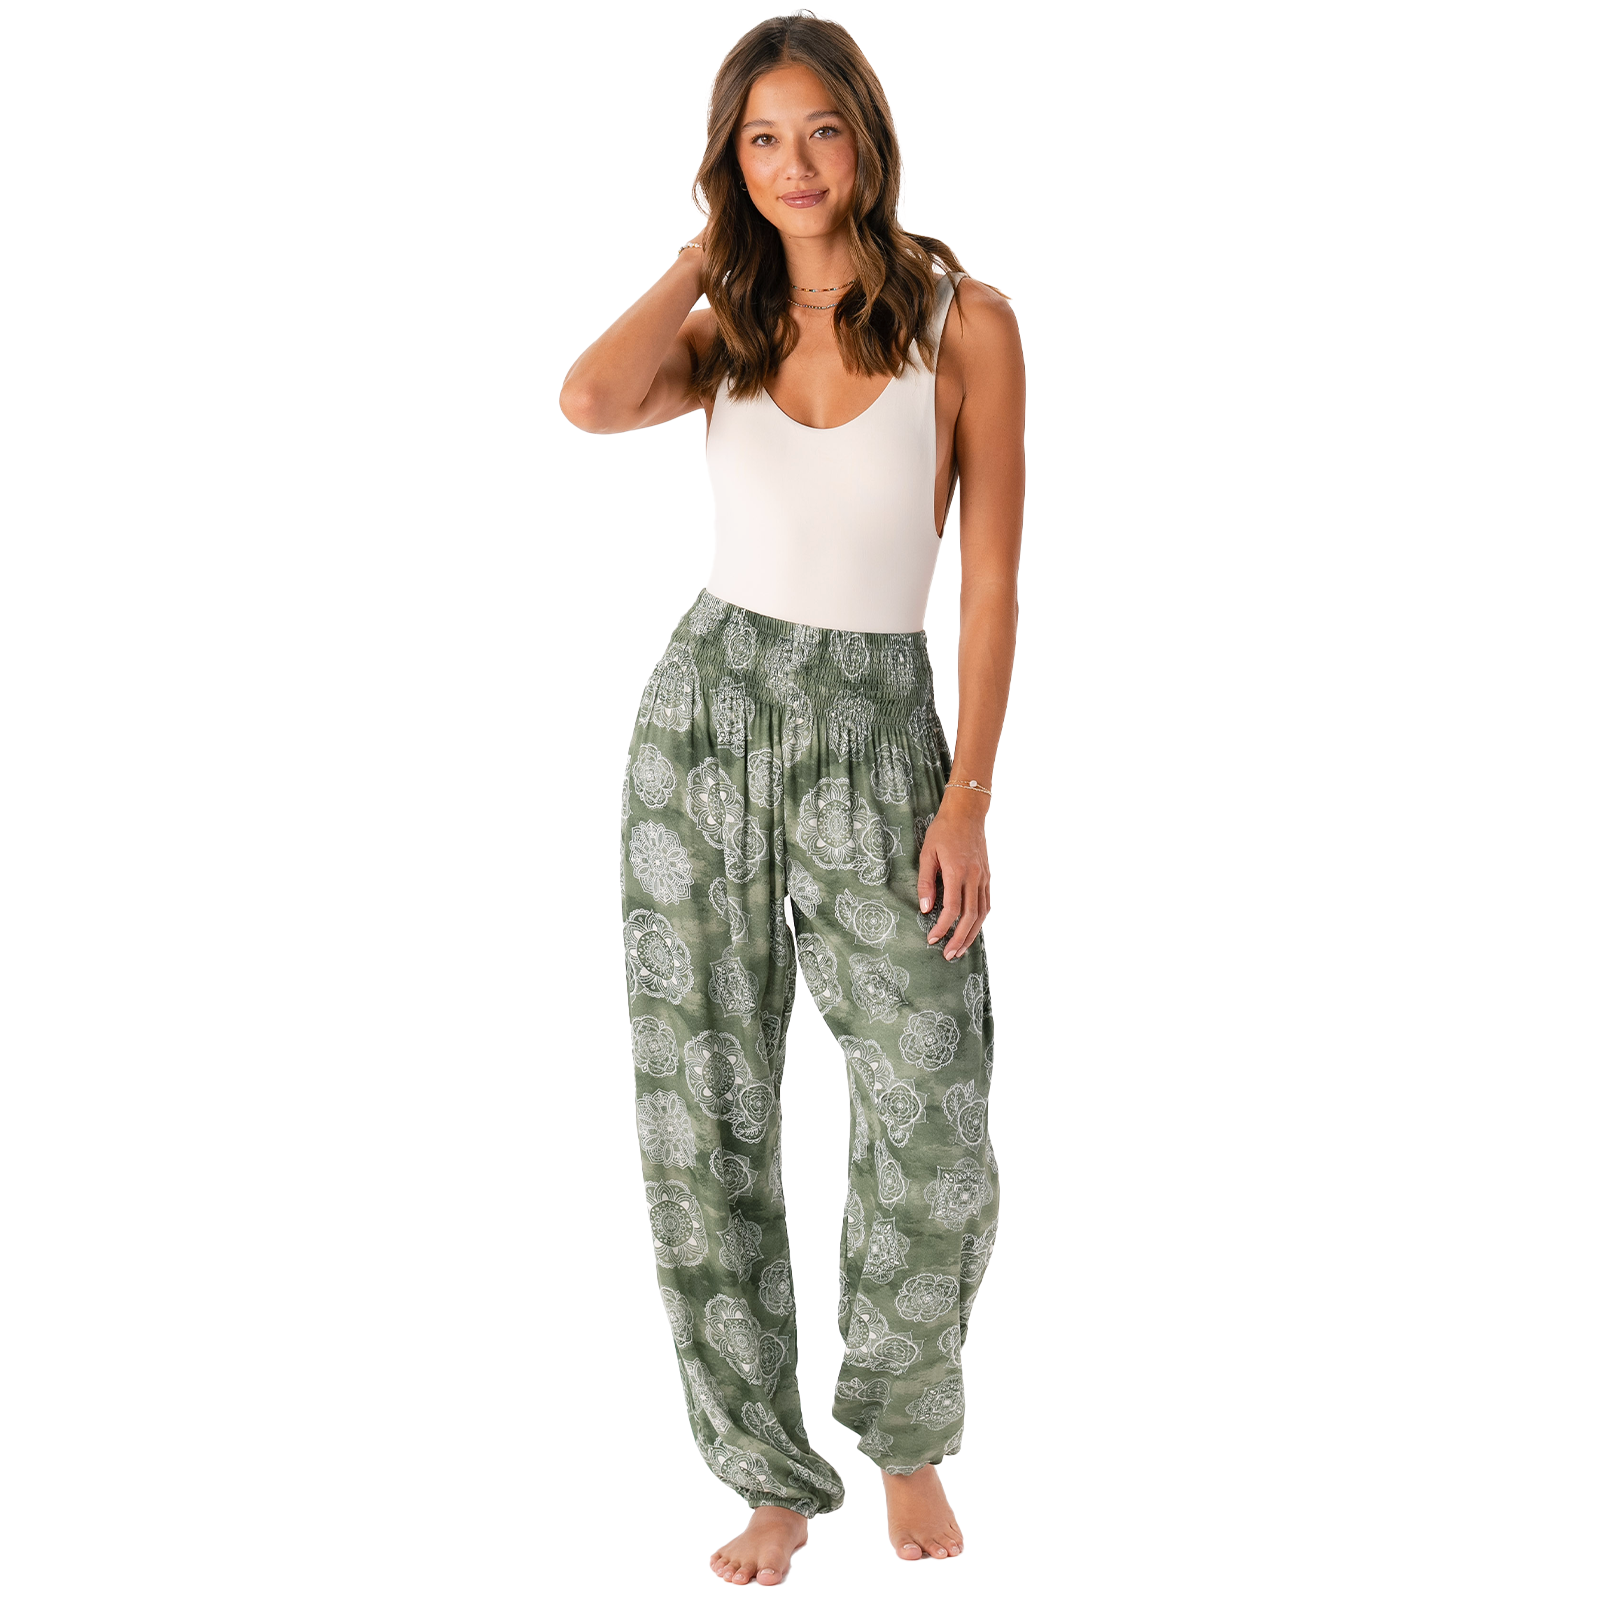 Model wearing olive colored harem pants with a white lace mandala print